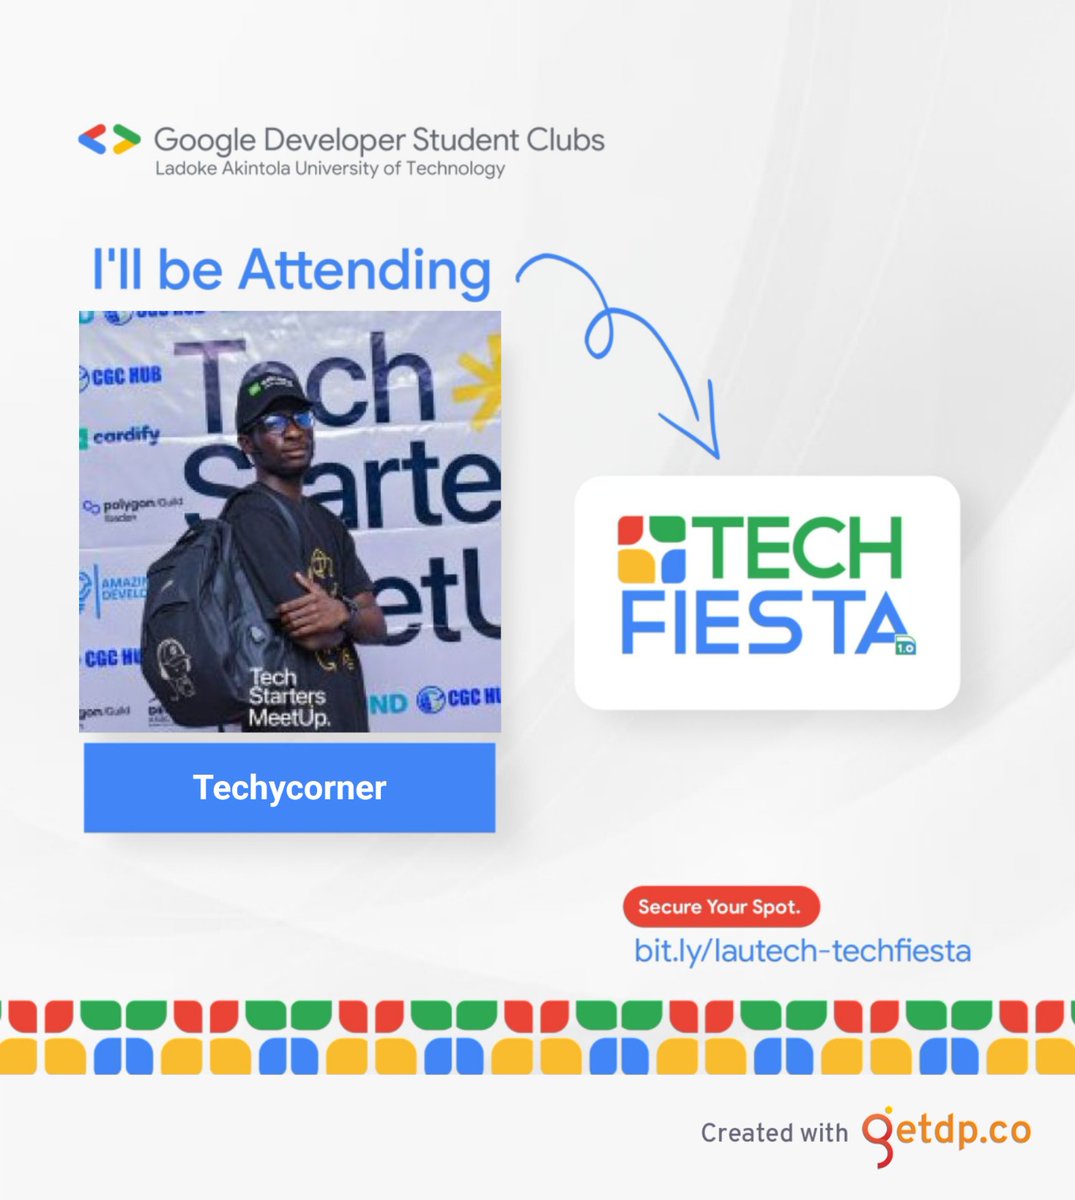 @AbdullahiOduna3 is attending Techfiesta 1.0 of @gdsclautech in @lautechofficial .... Join me here, this Saturday...